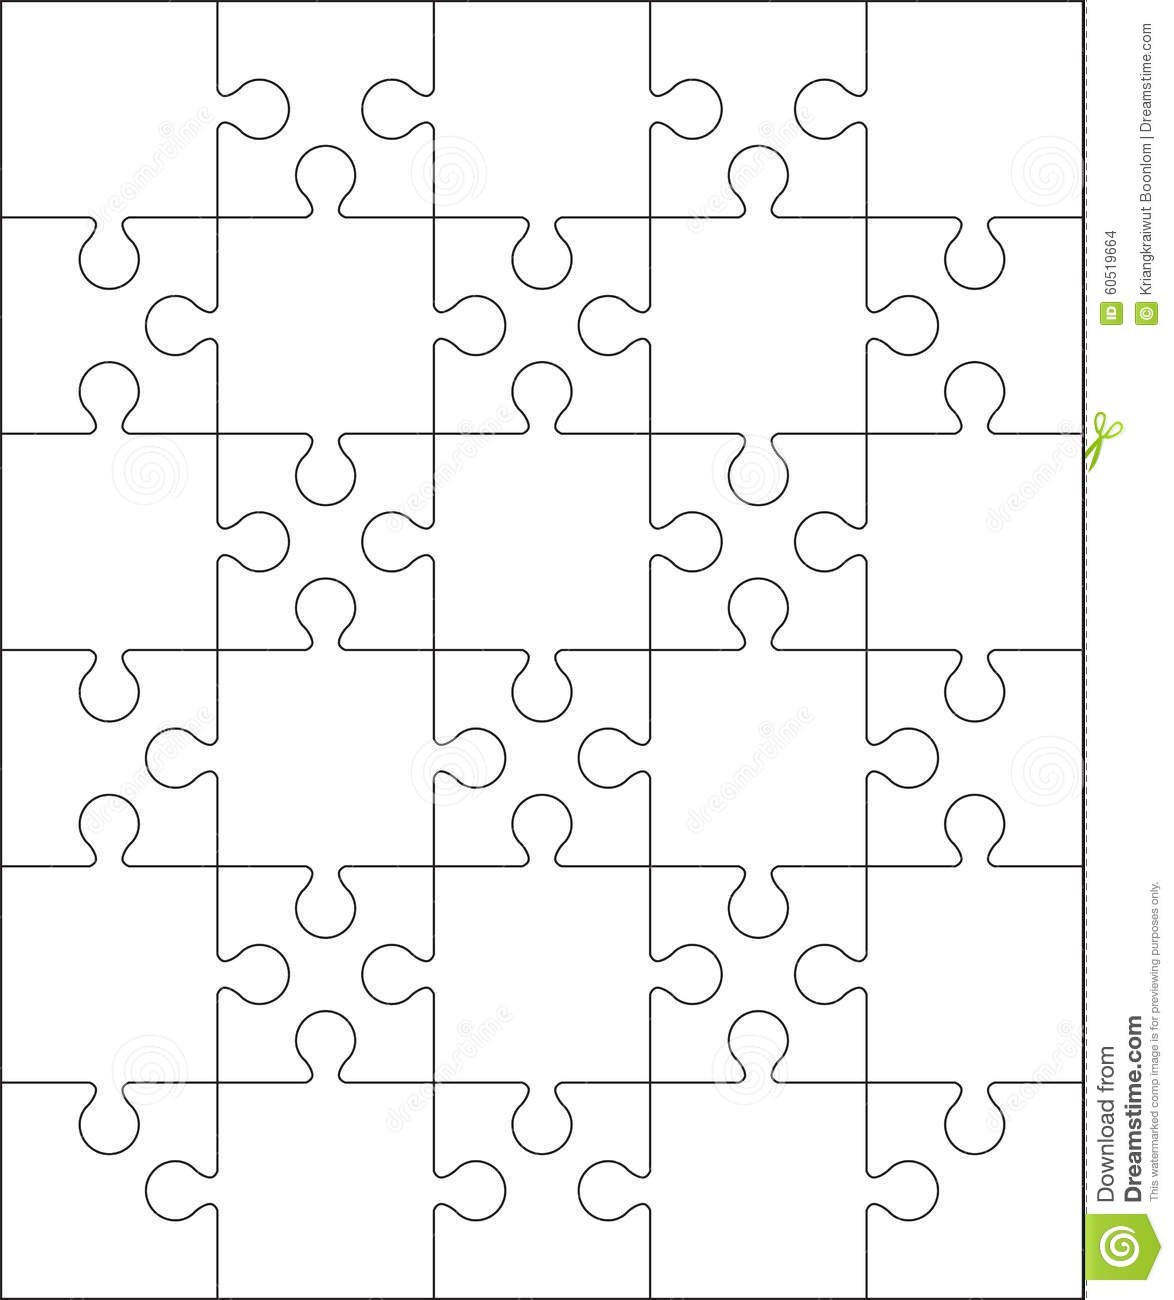 Jigsaw Puzzle Blank Template Or Cutting Guidelines Stock Vector within Blank Jigsaw Piece Template